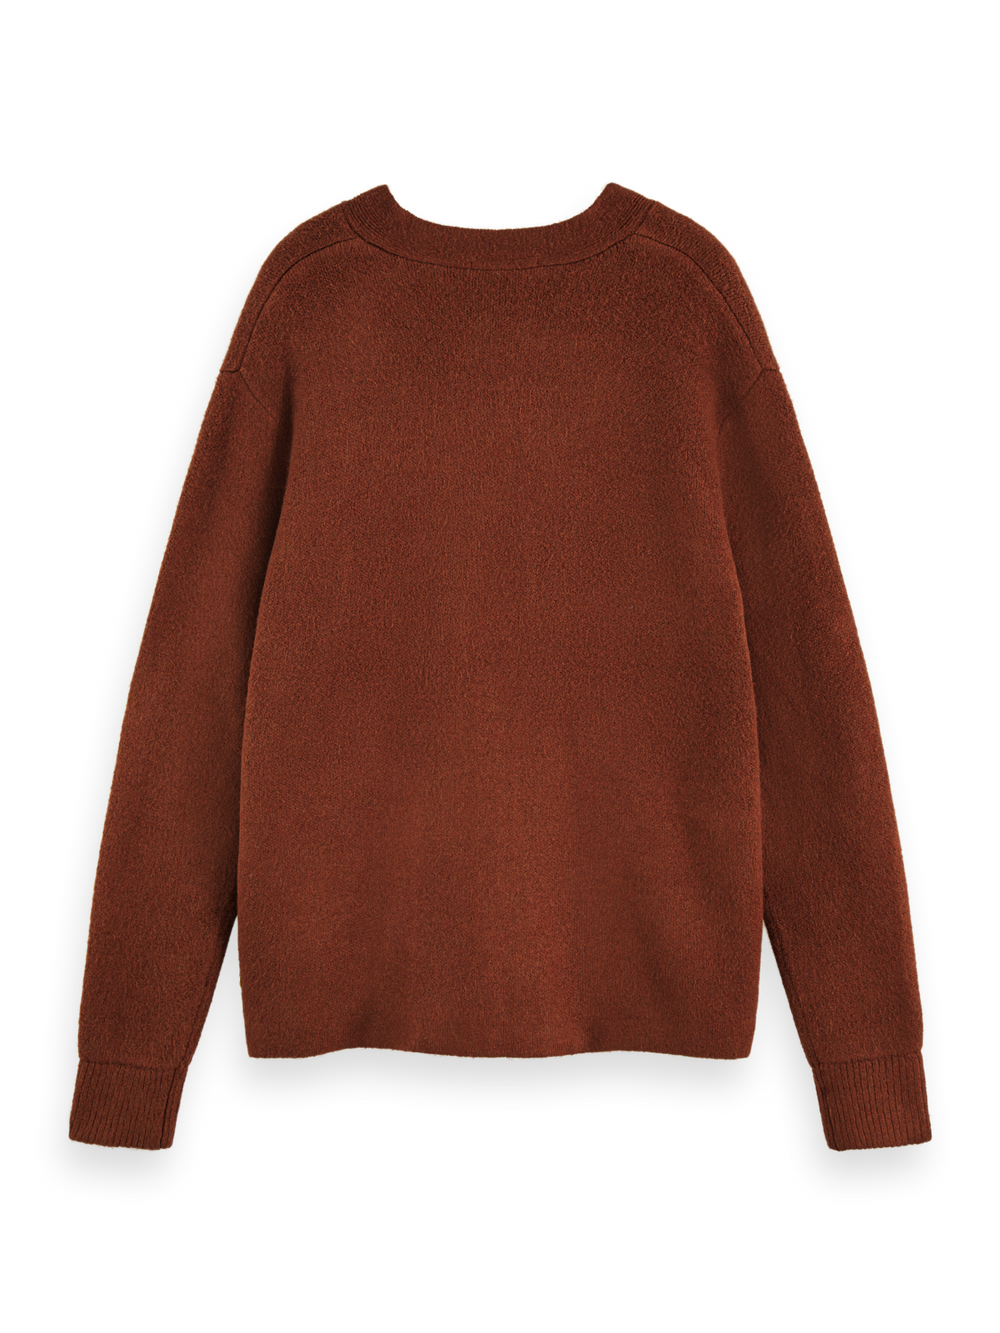 Scotch & Soda - Relaxed Soft Knit Cardigan in Russet Melange | Buster McGee